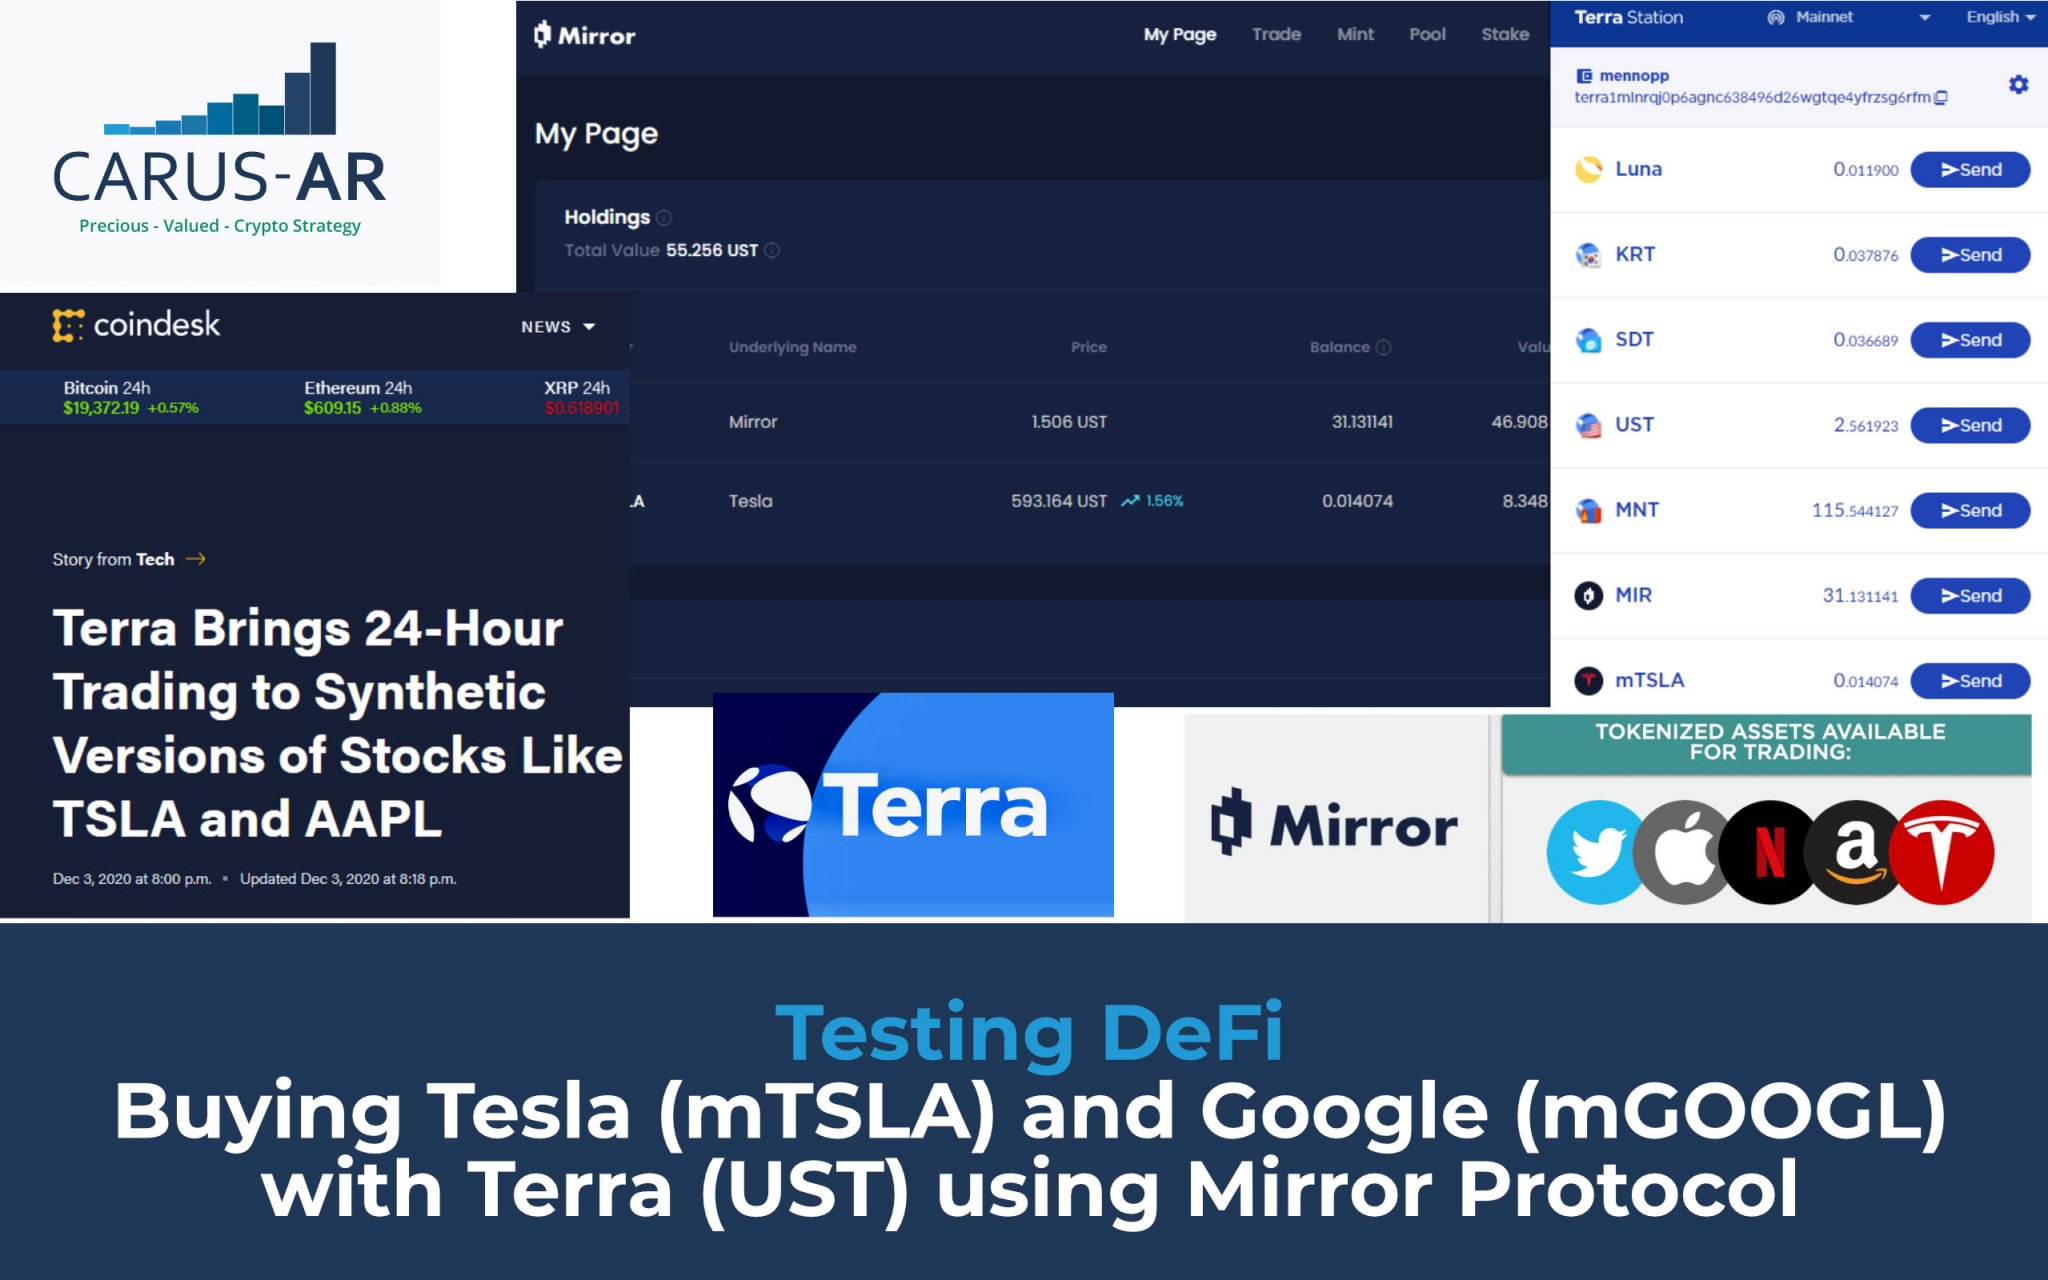 Buying Tesla and Google with UST using Mirror Protocol